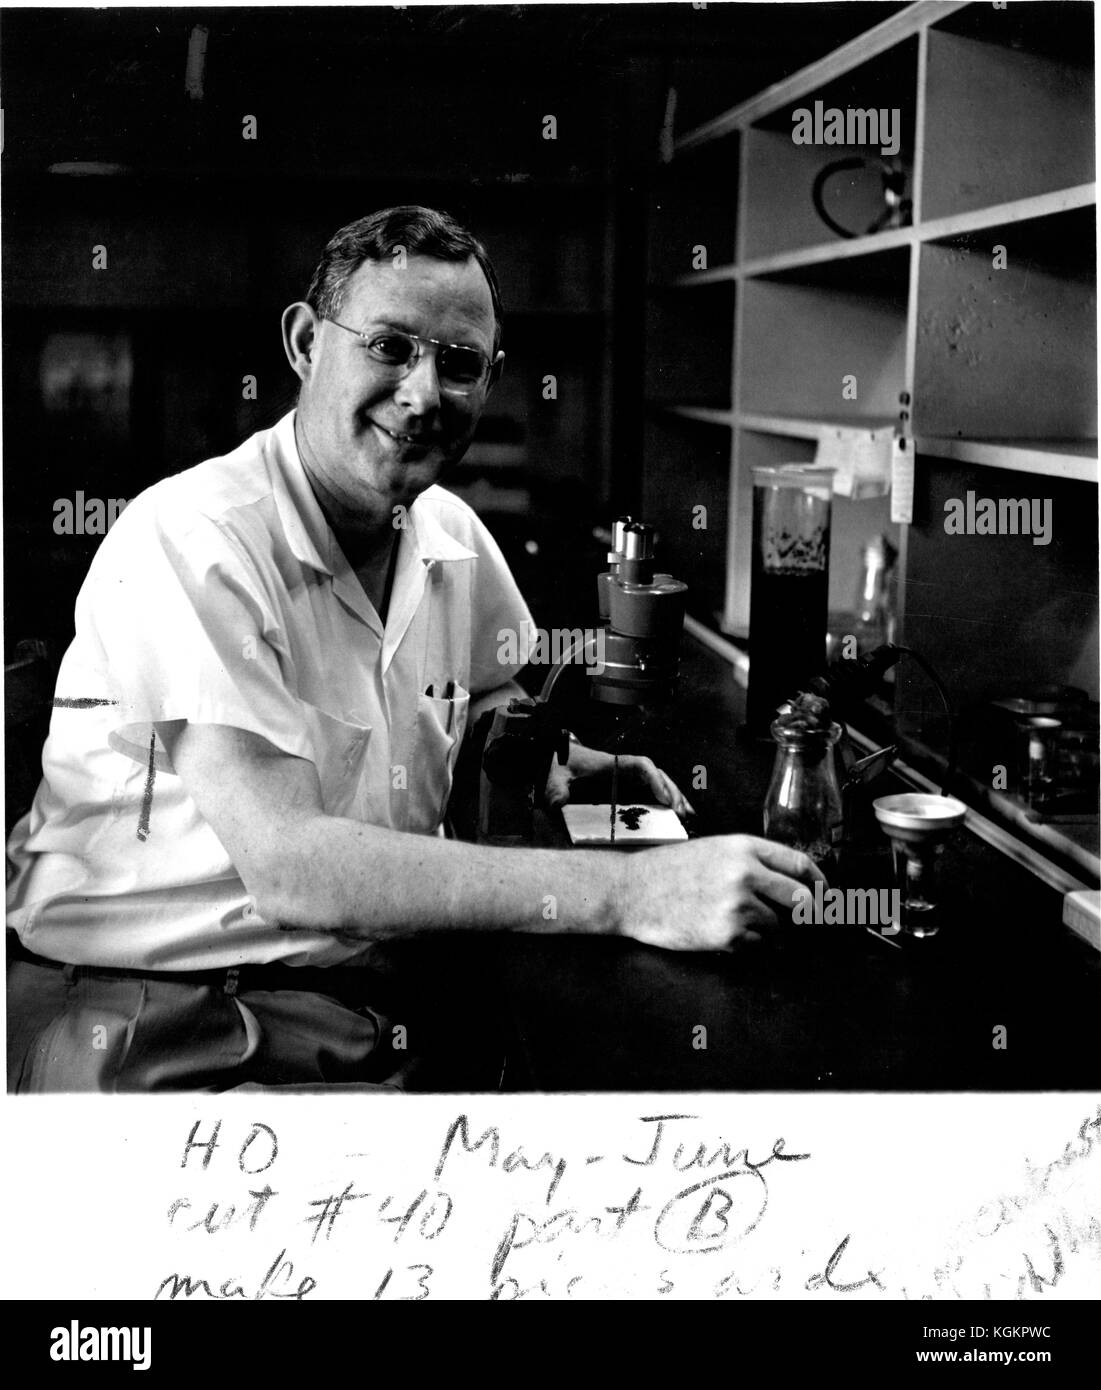 Hiram Bentley, geneticist at the Johns Hopkins University in Baltimore, Maryland, sitting in lab posing with microscope, 1956. () Stock Photo